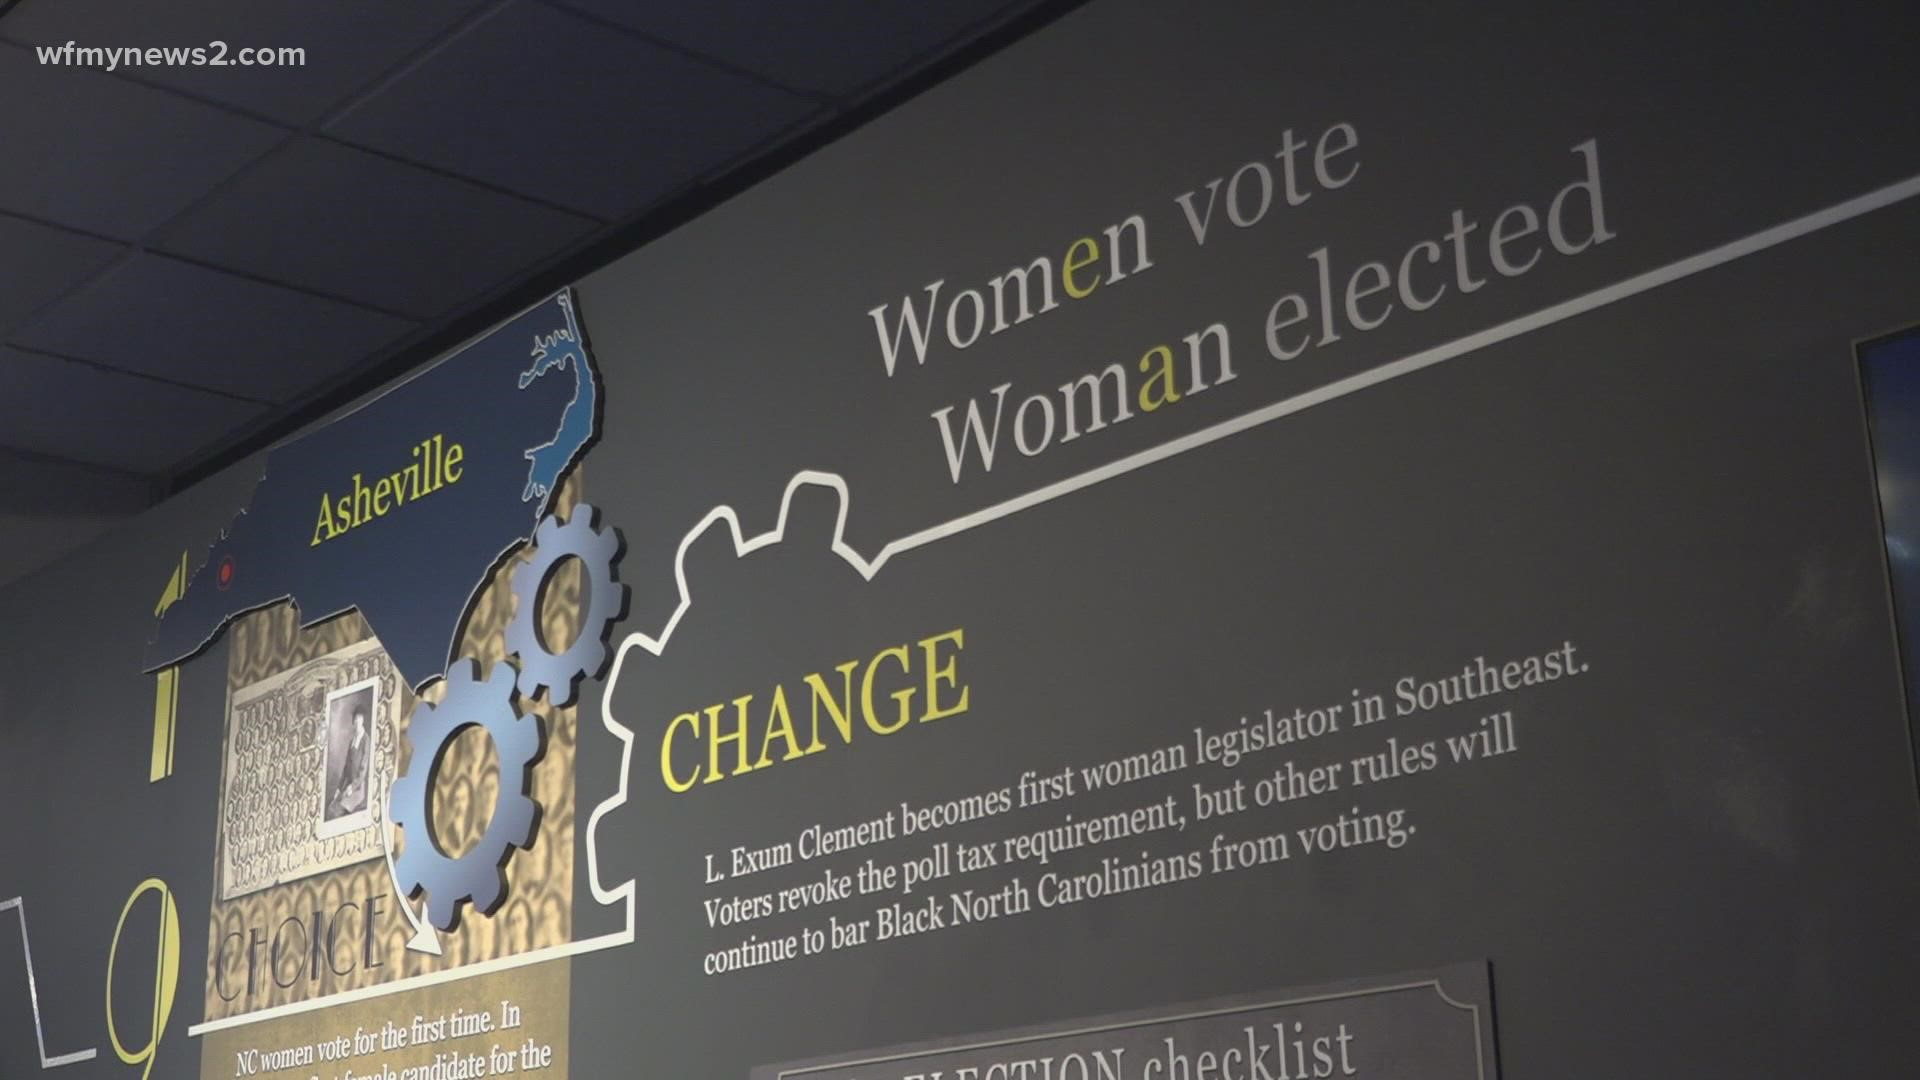 The NC Democracy Eleven Elections gallery highlights what influenced decisions made across NC that are shaping democracy today.